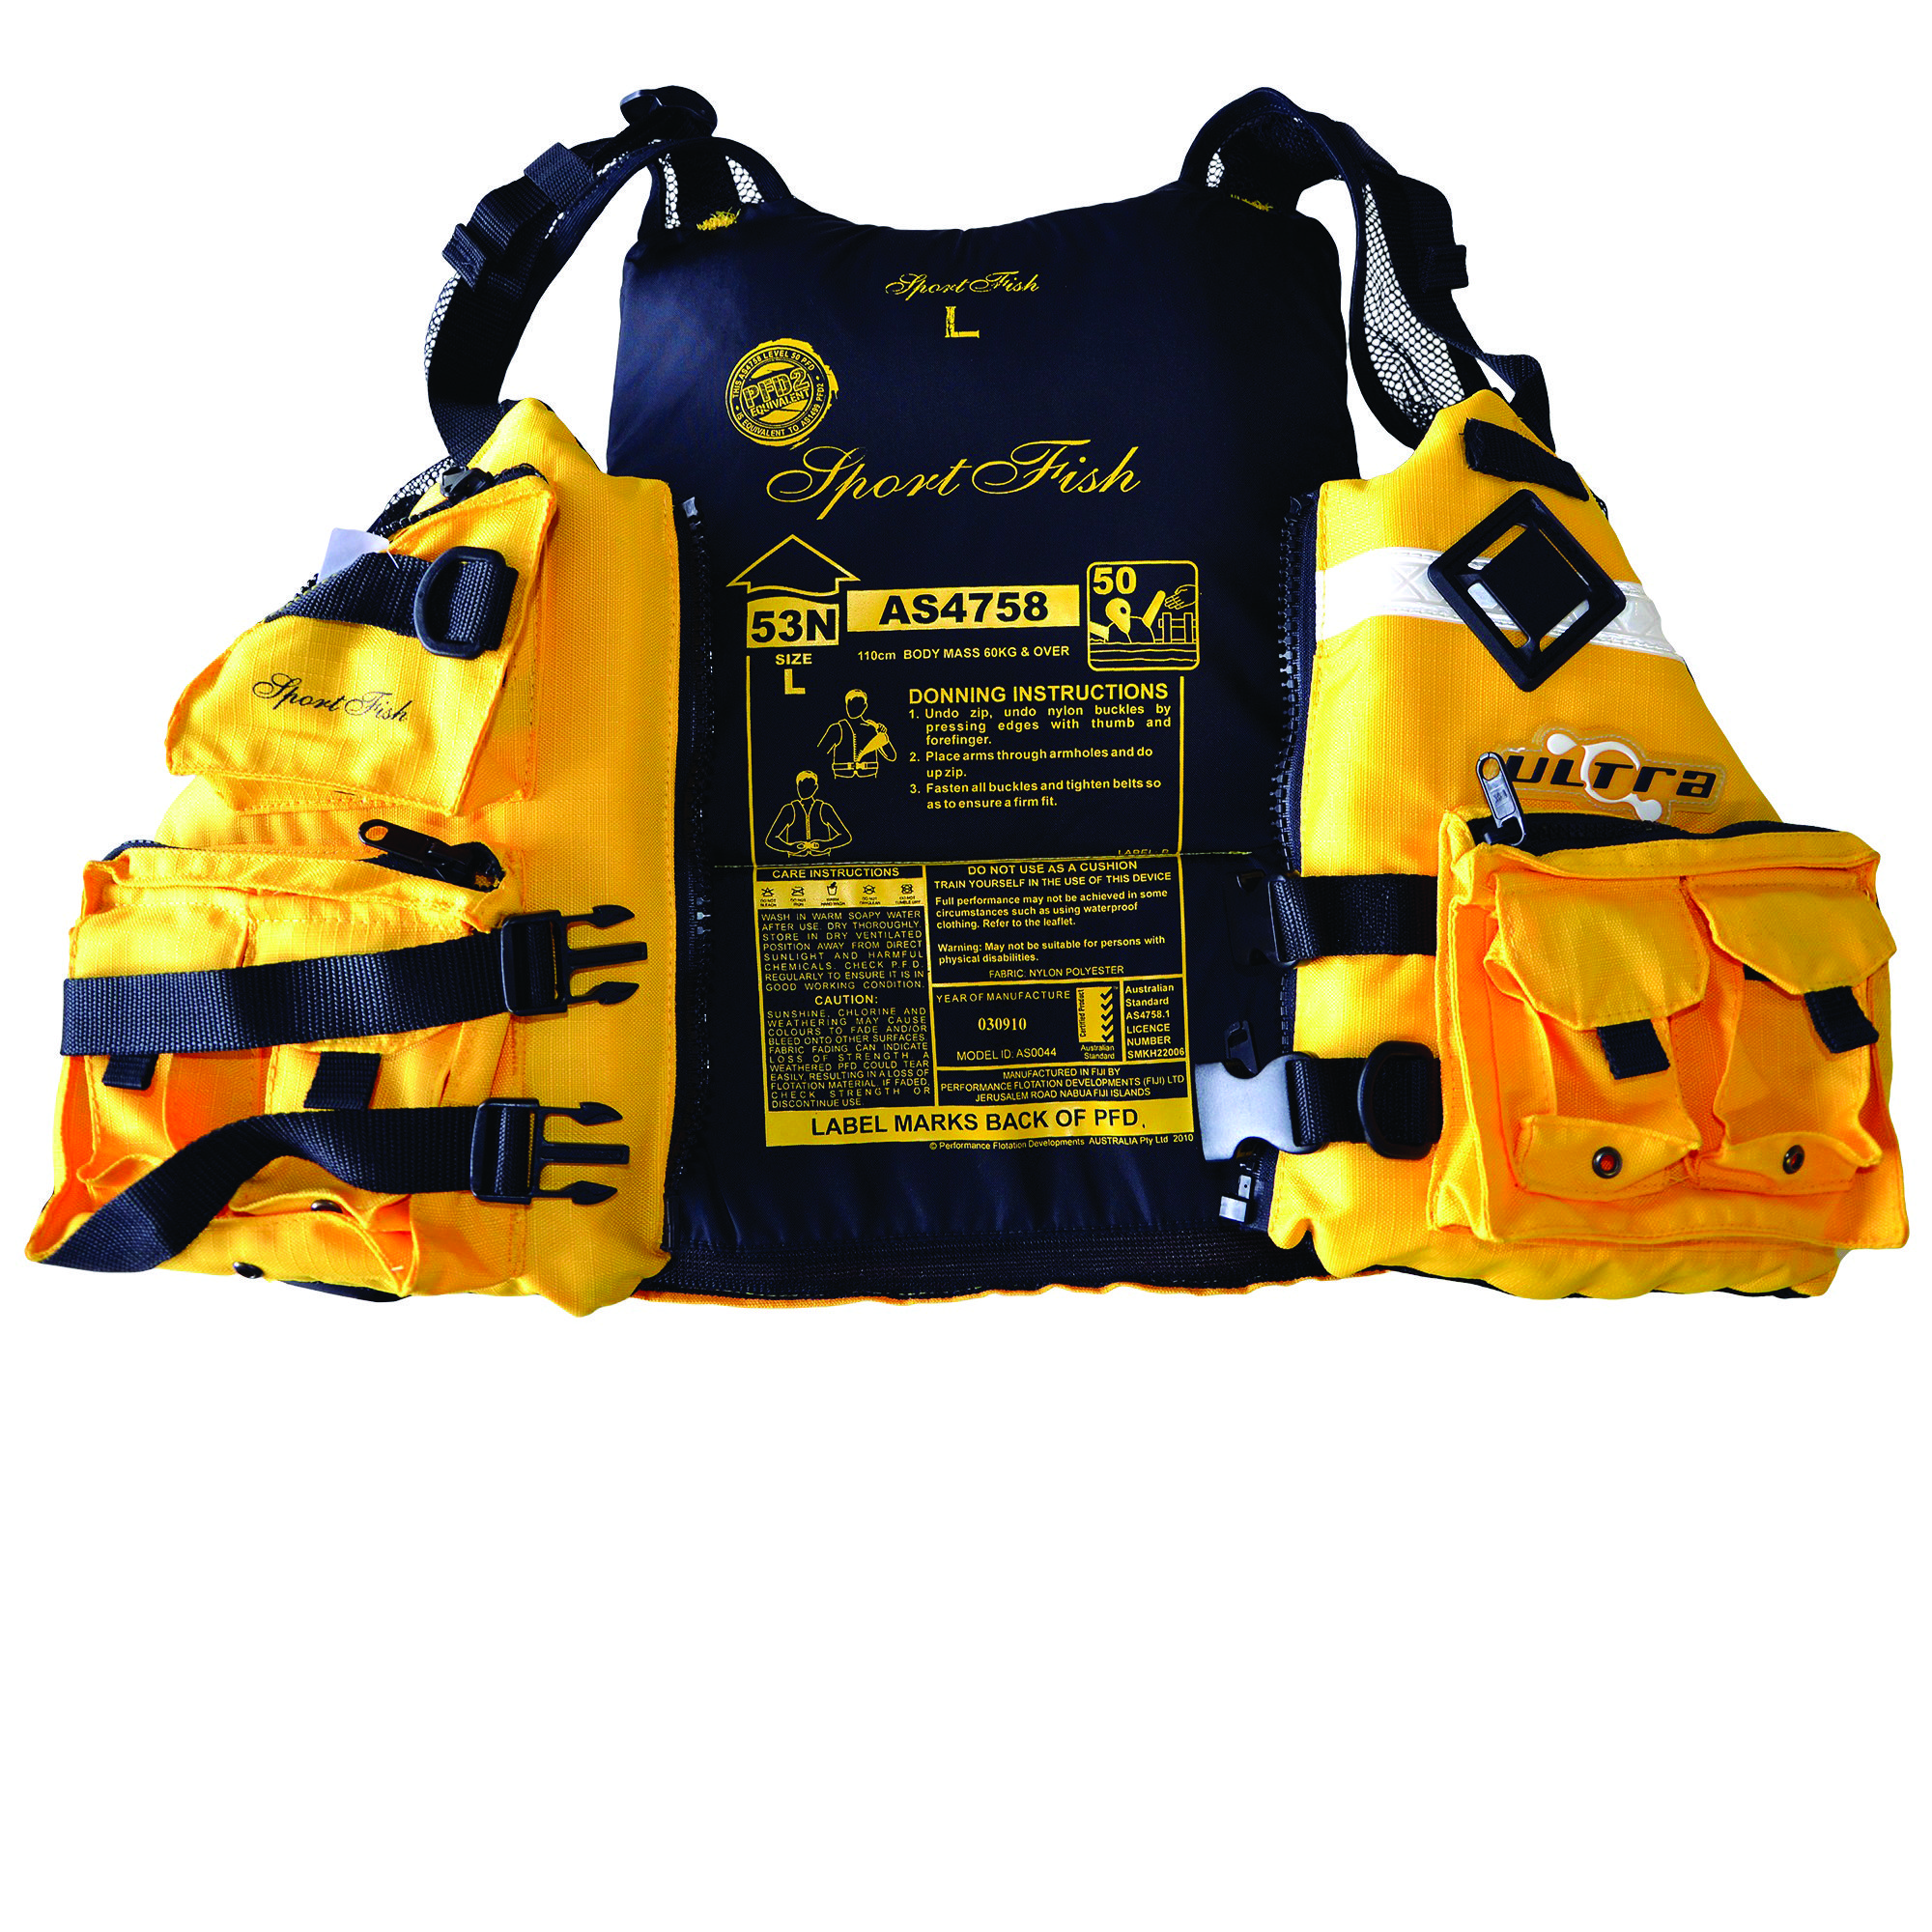 An AS4758 approved PFD with donning instructions is highly recommended to ensure you comply with regulations.